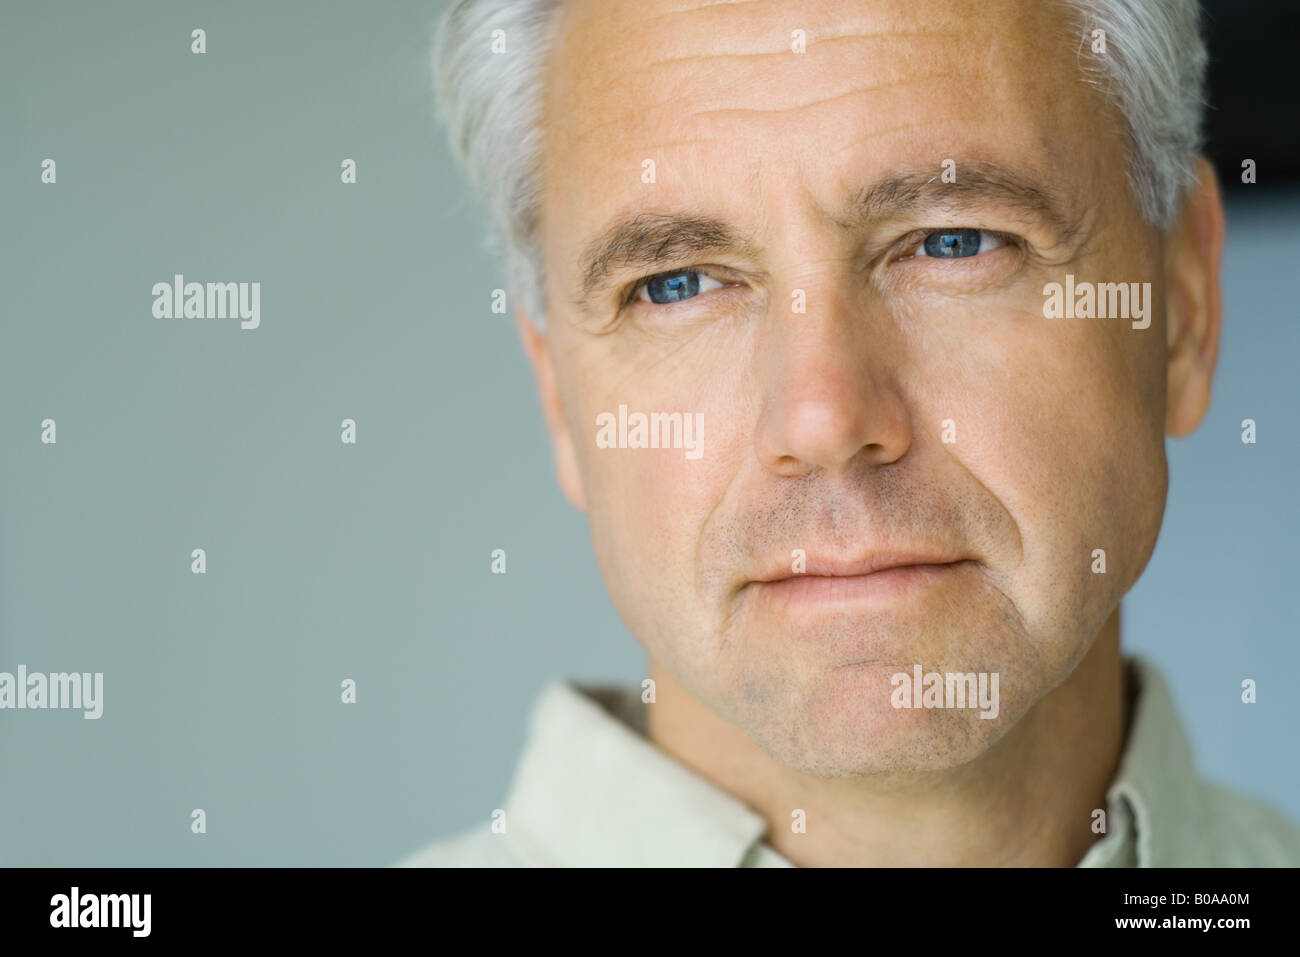 Mature man, looking out of frame, close-up, portrait Stock Photo